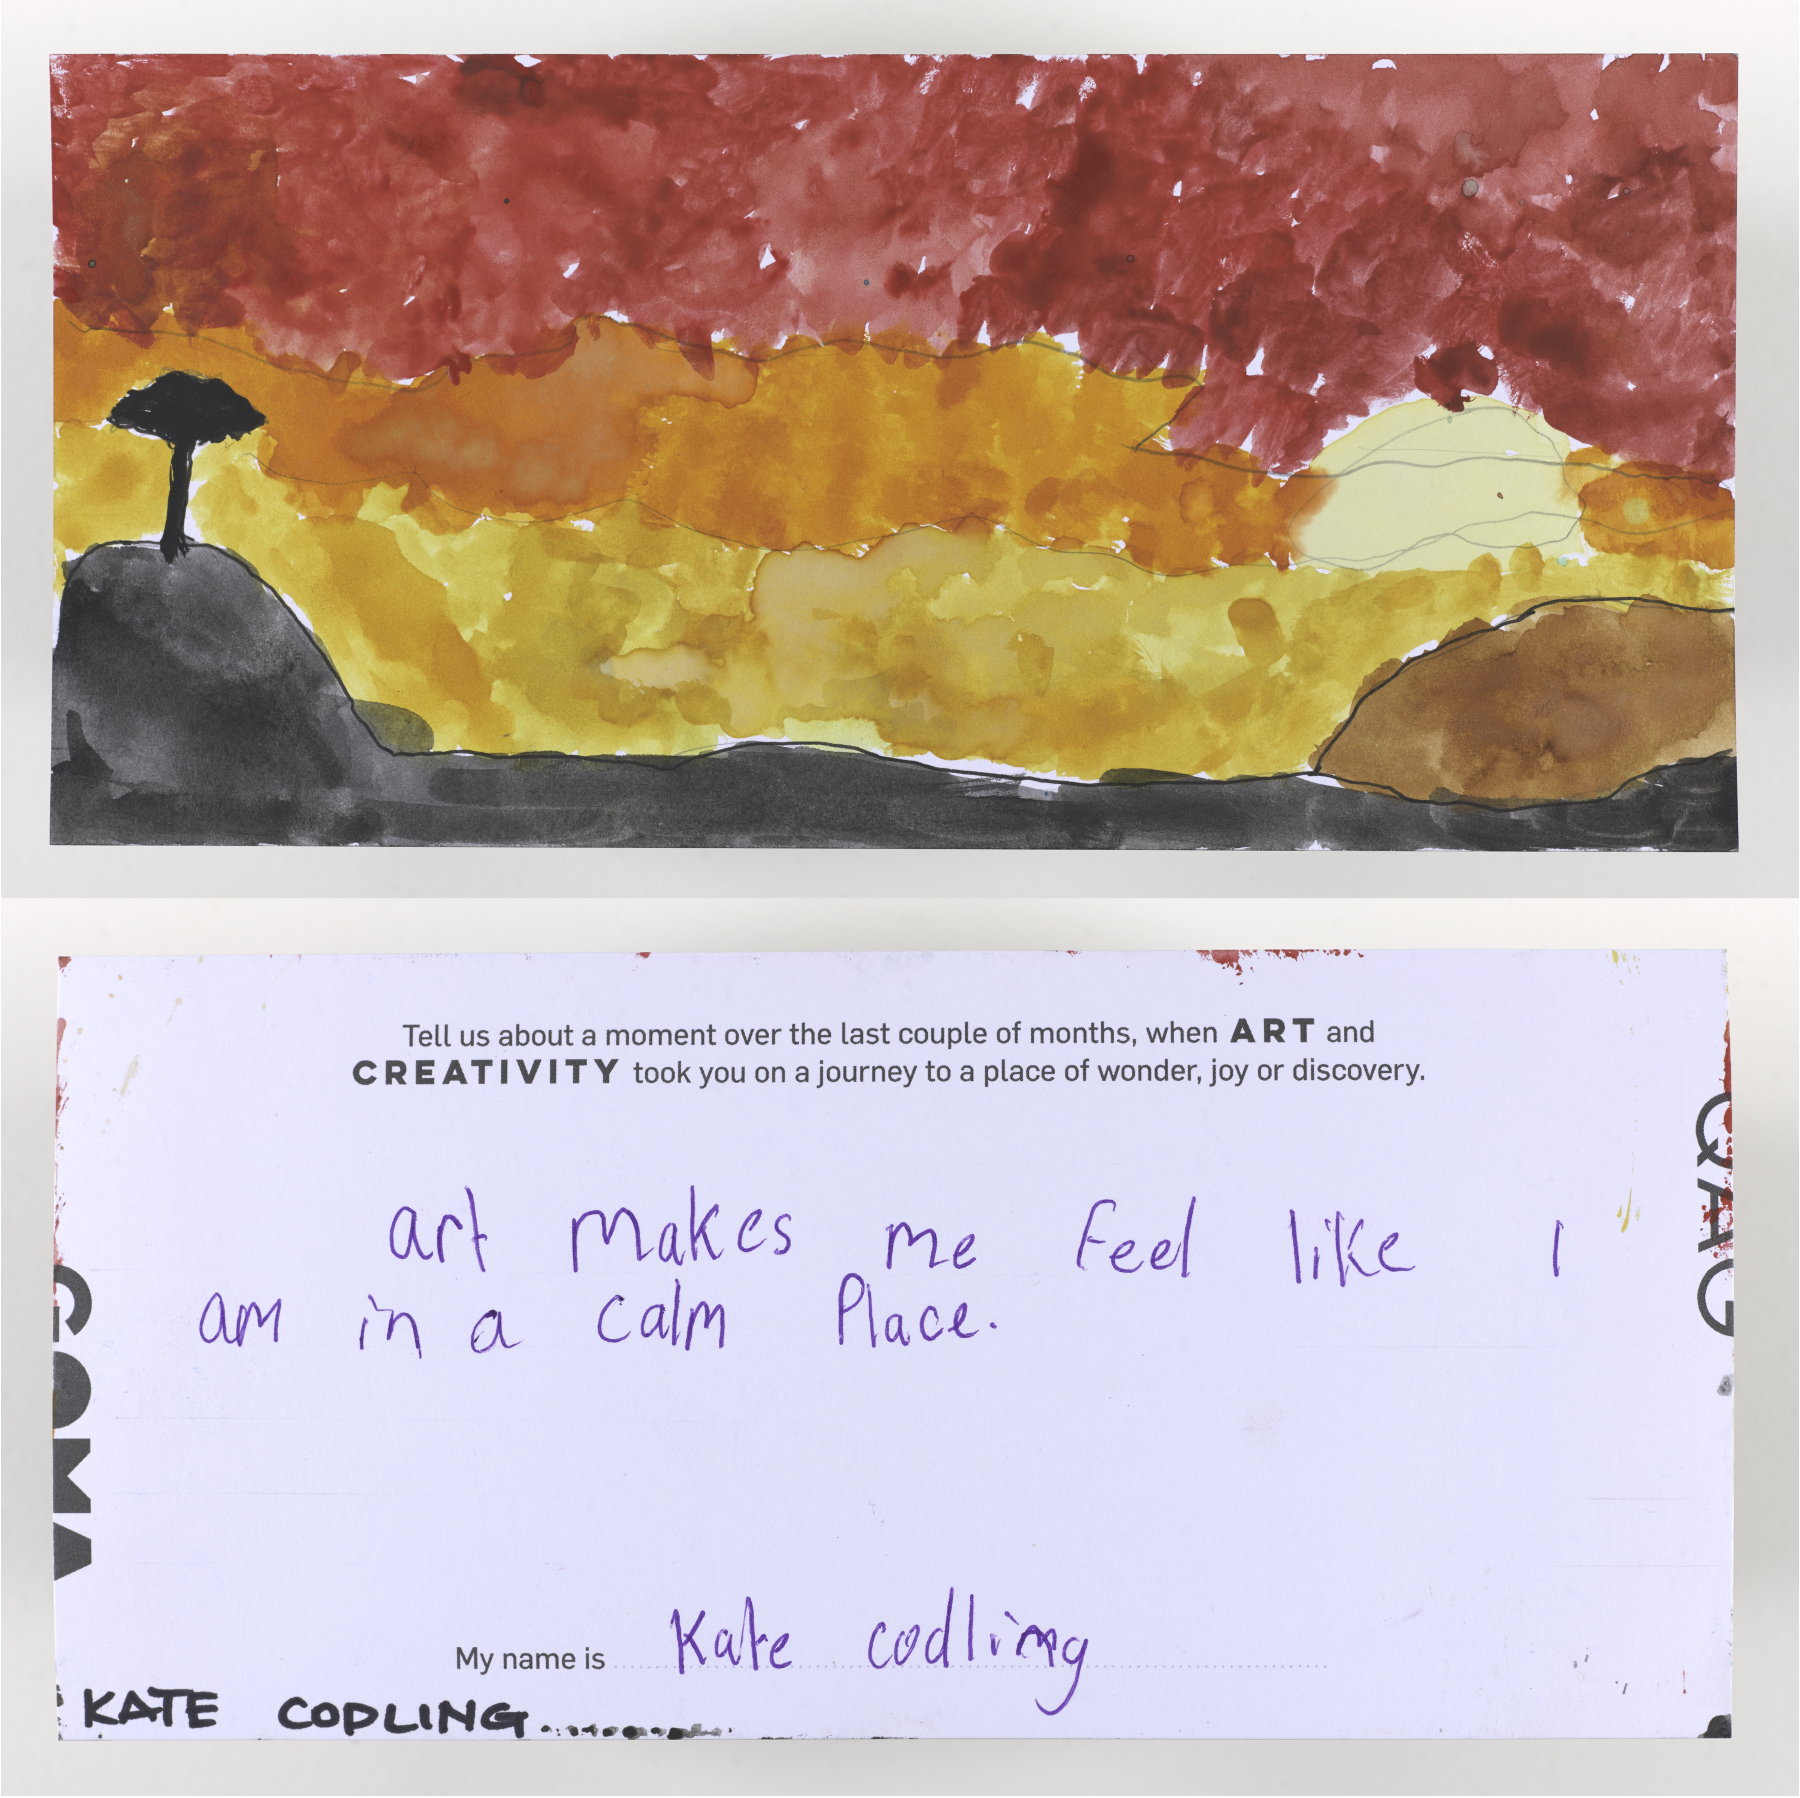 Generated image of the artwork: Kate Codling